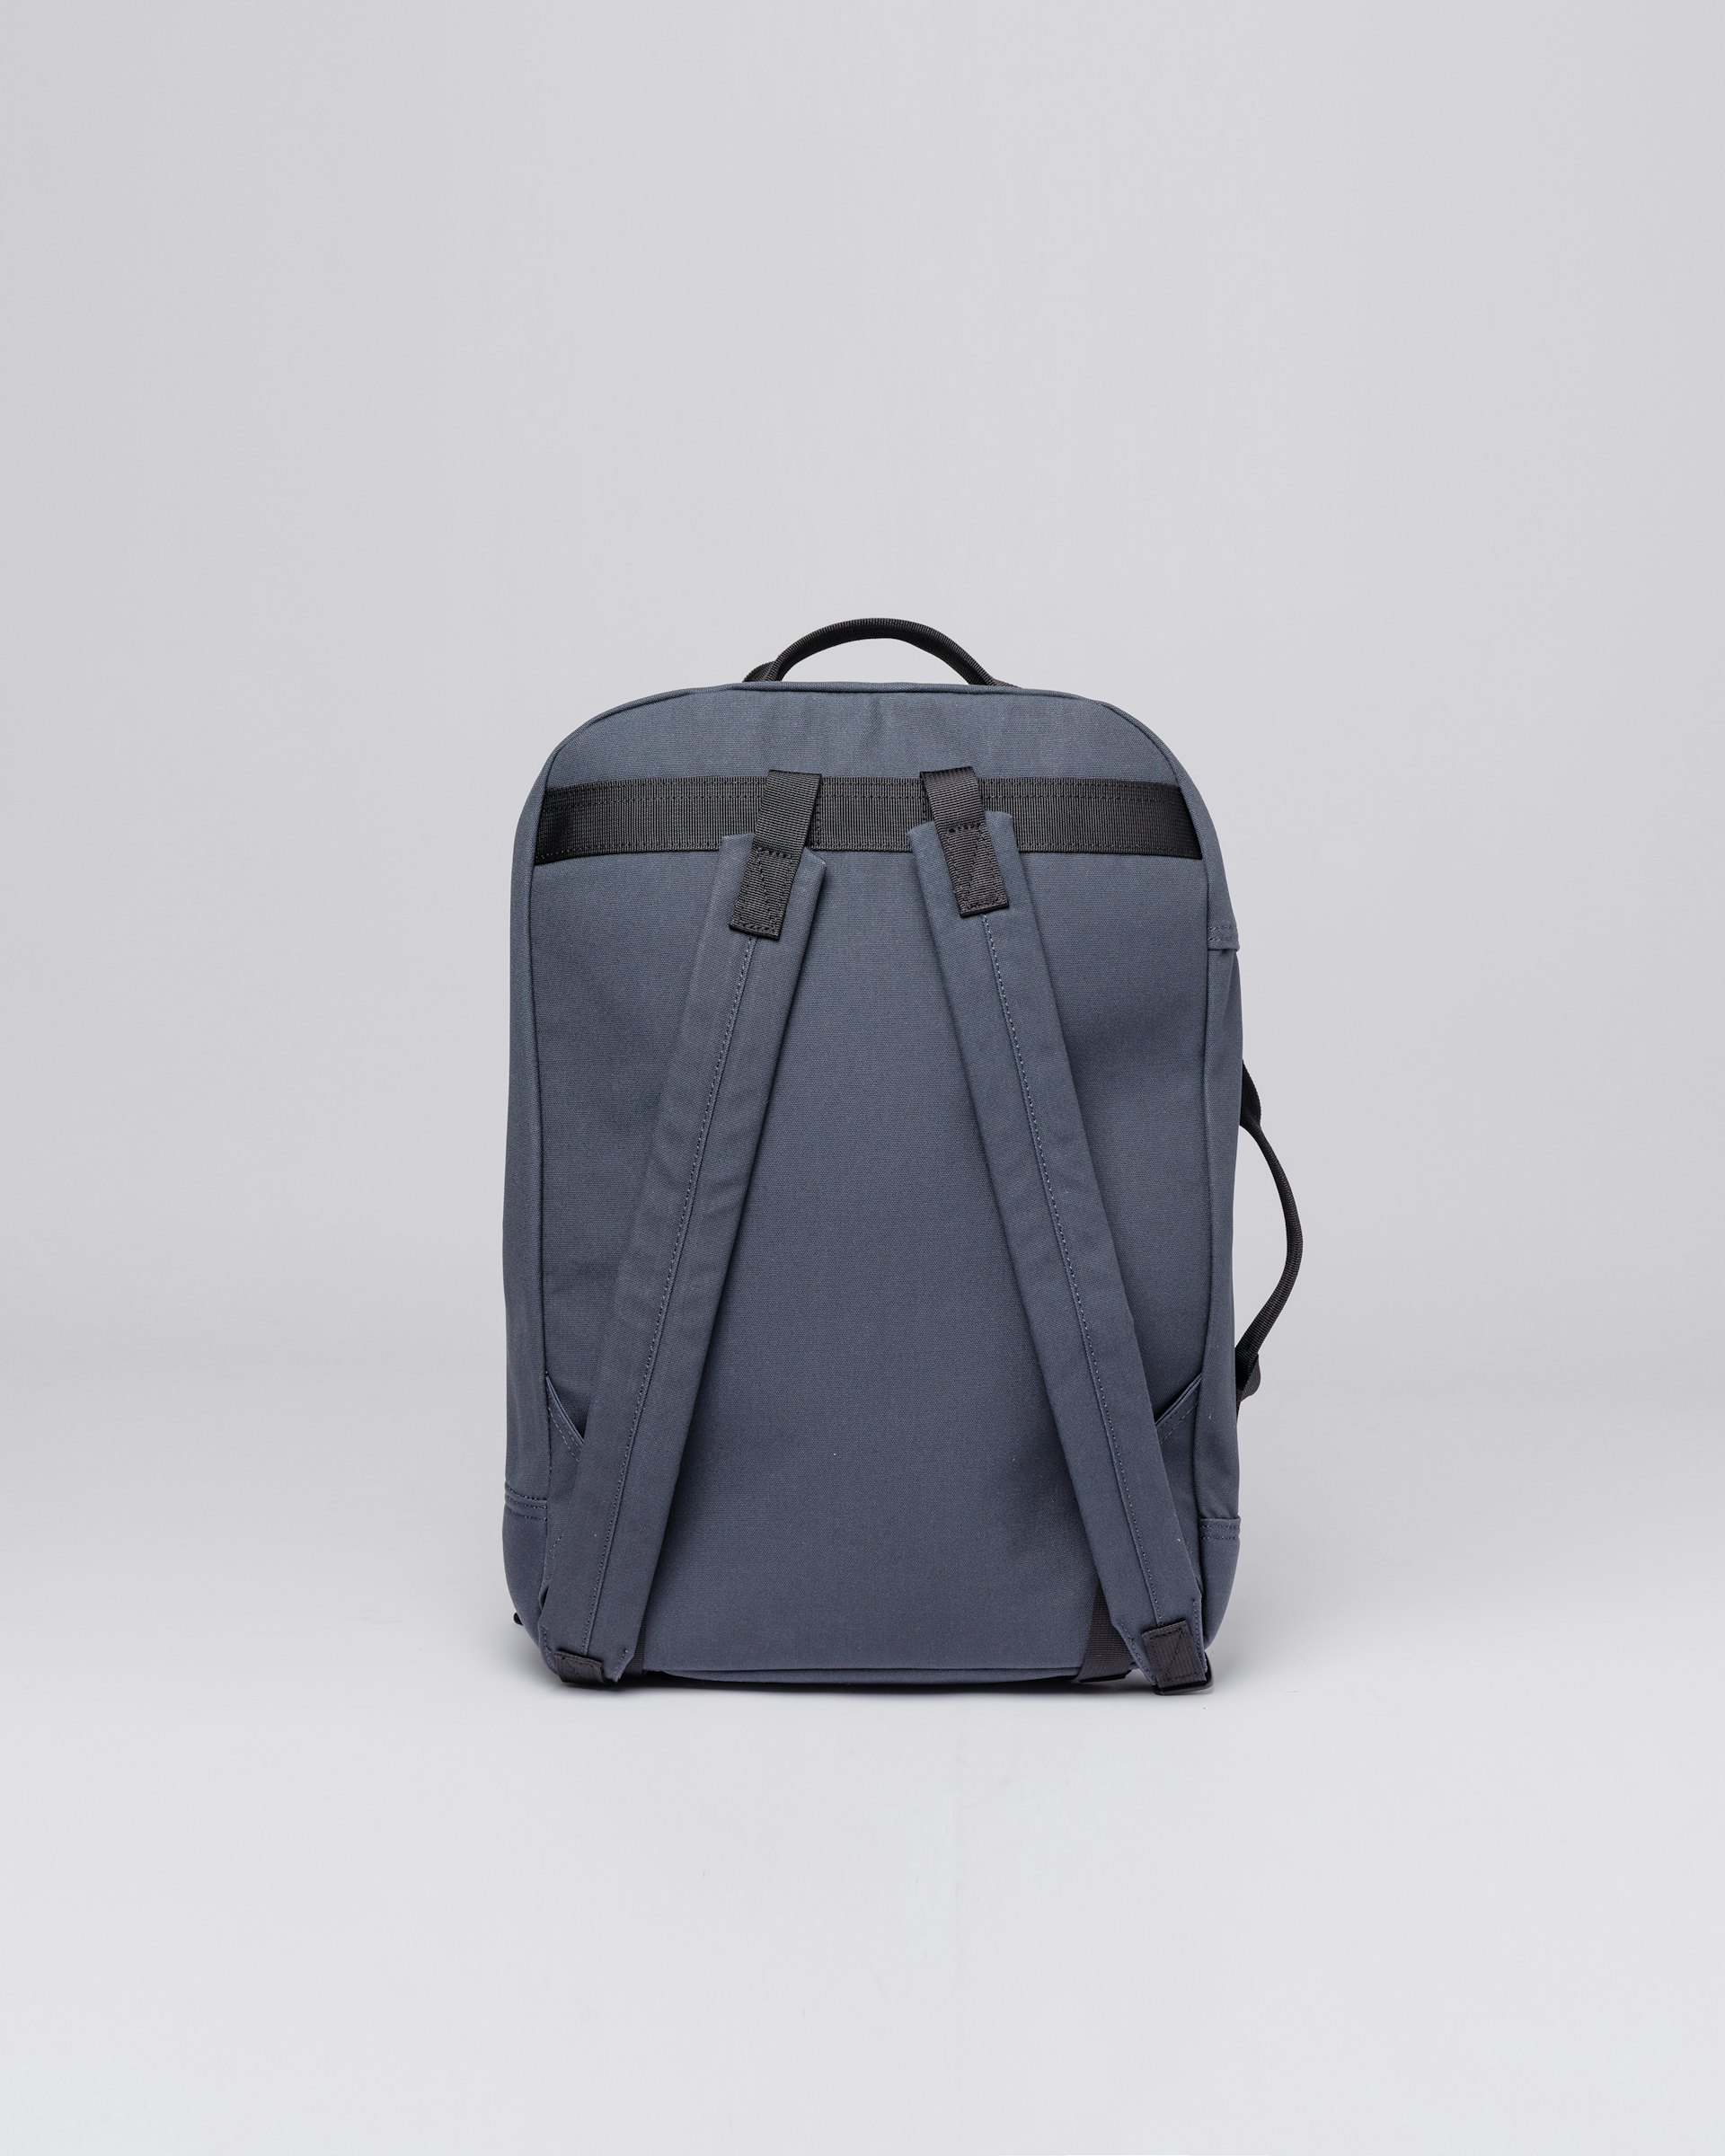 August belongs to the category Backpacks and is in color navy (2 of 4)